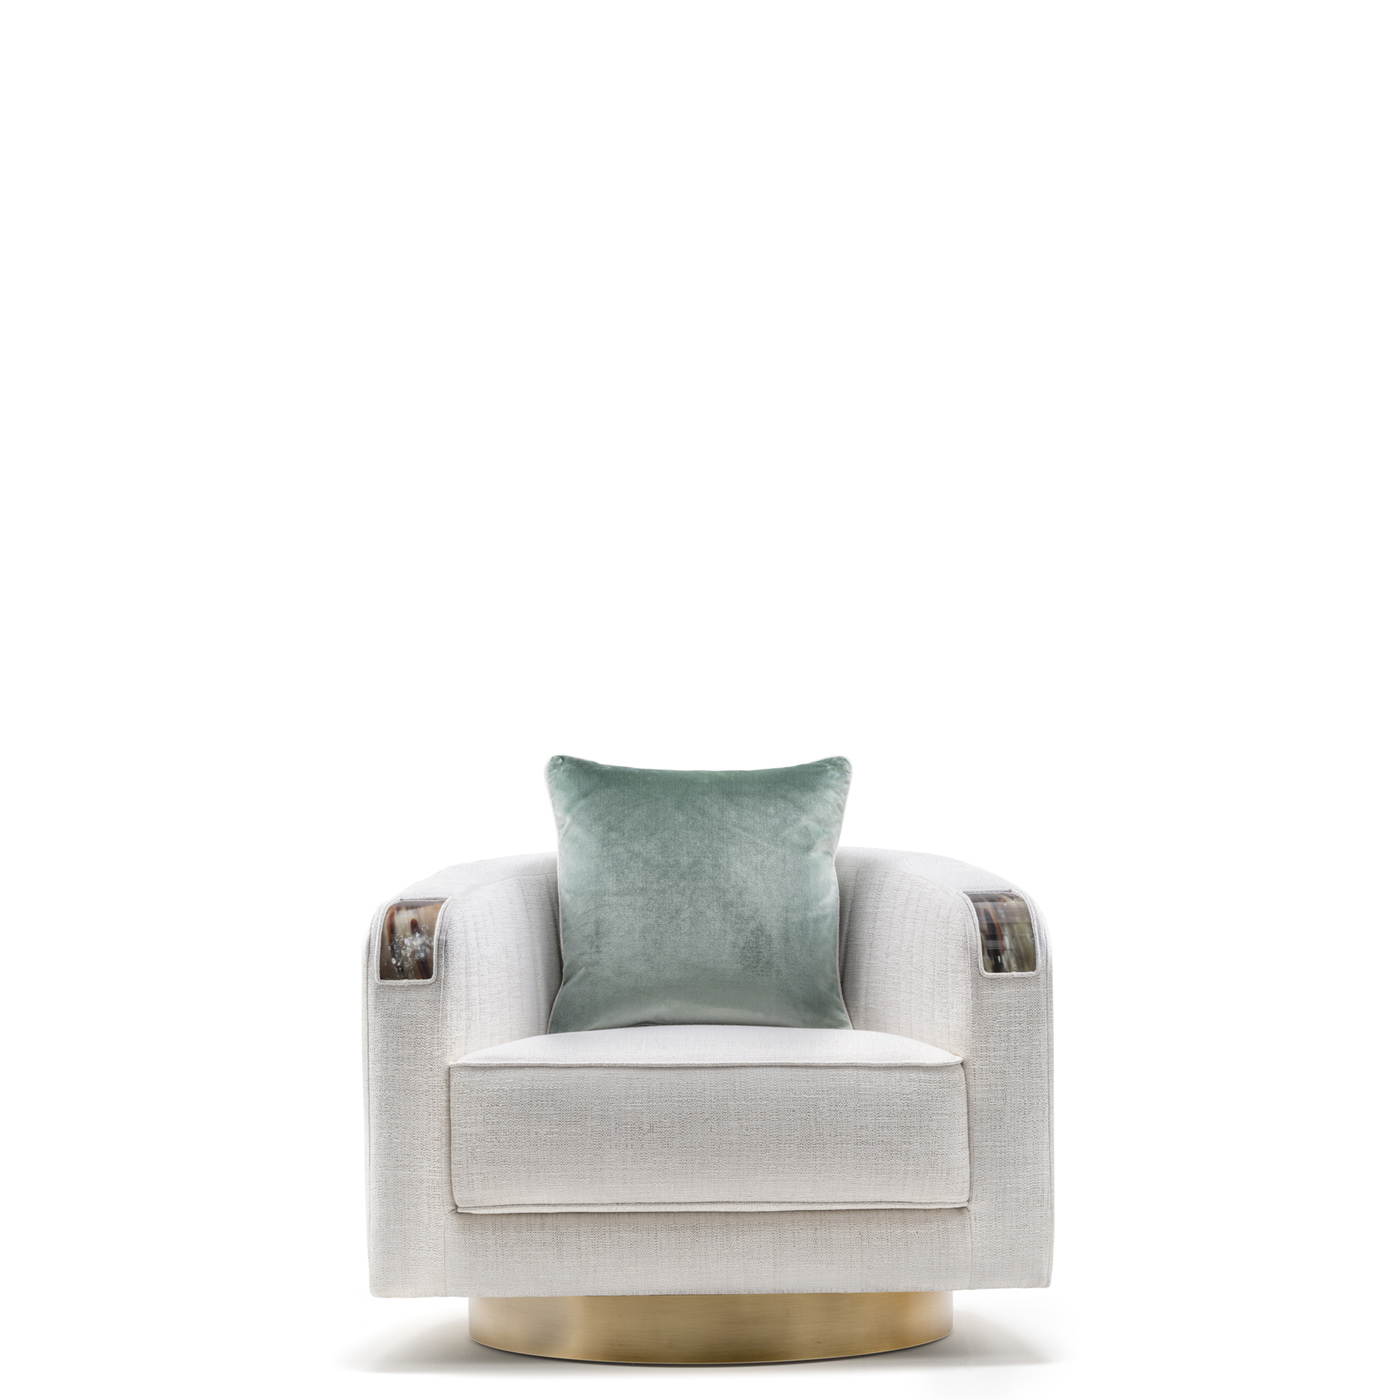 Sofas and seats - Rea armchair in Sparks fabric with horn armrests - Arcahorn